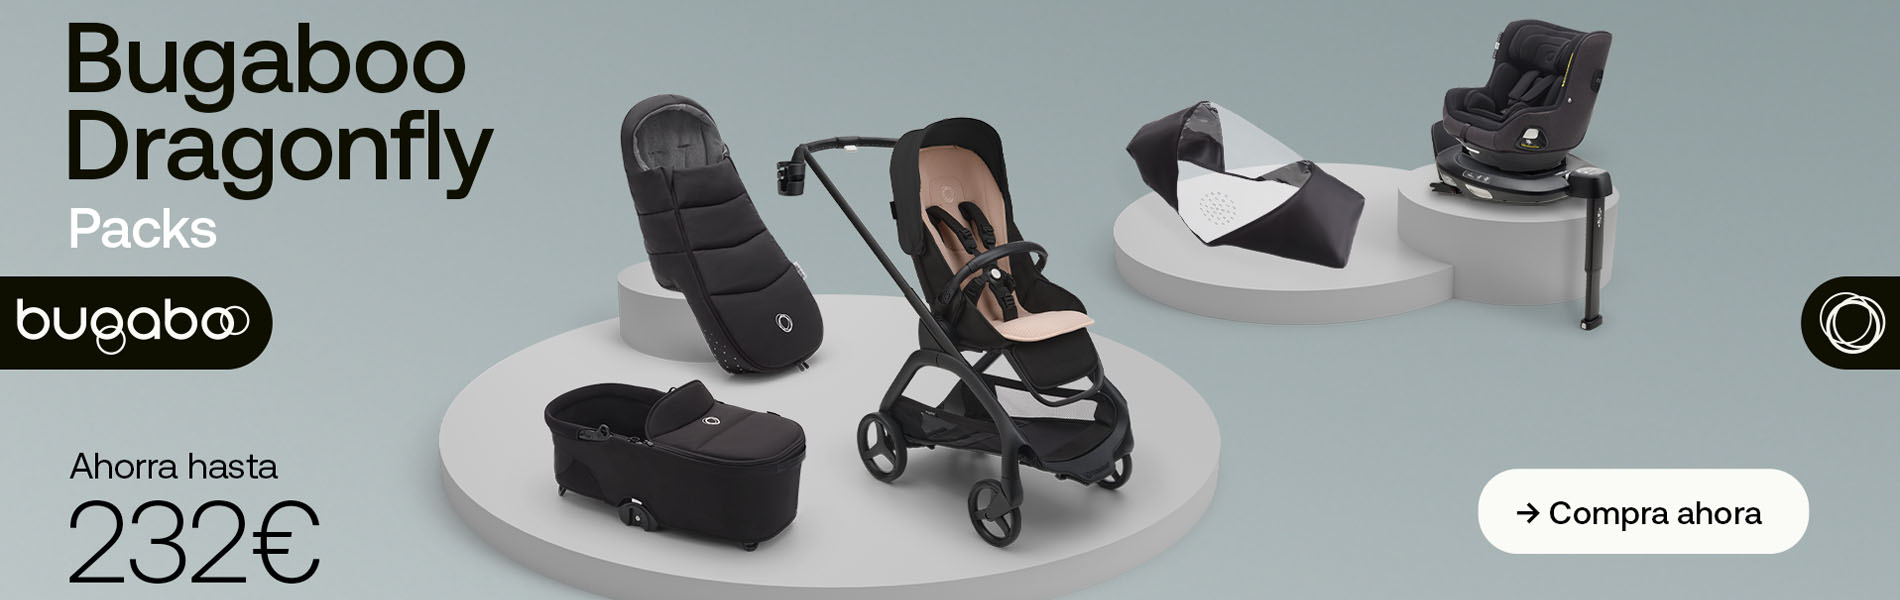 Bugaboo Dragonfly packs con descuento